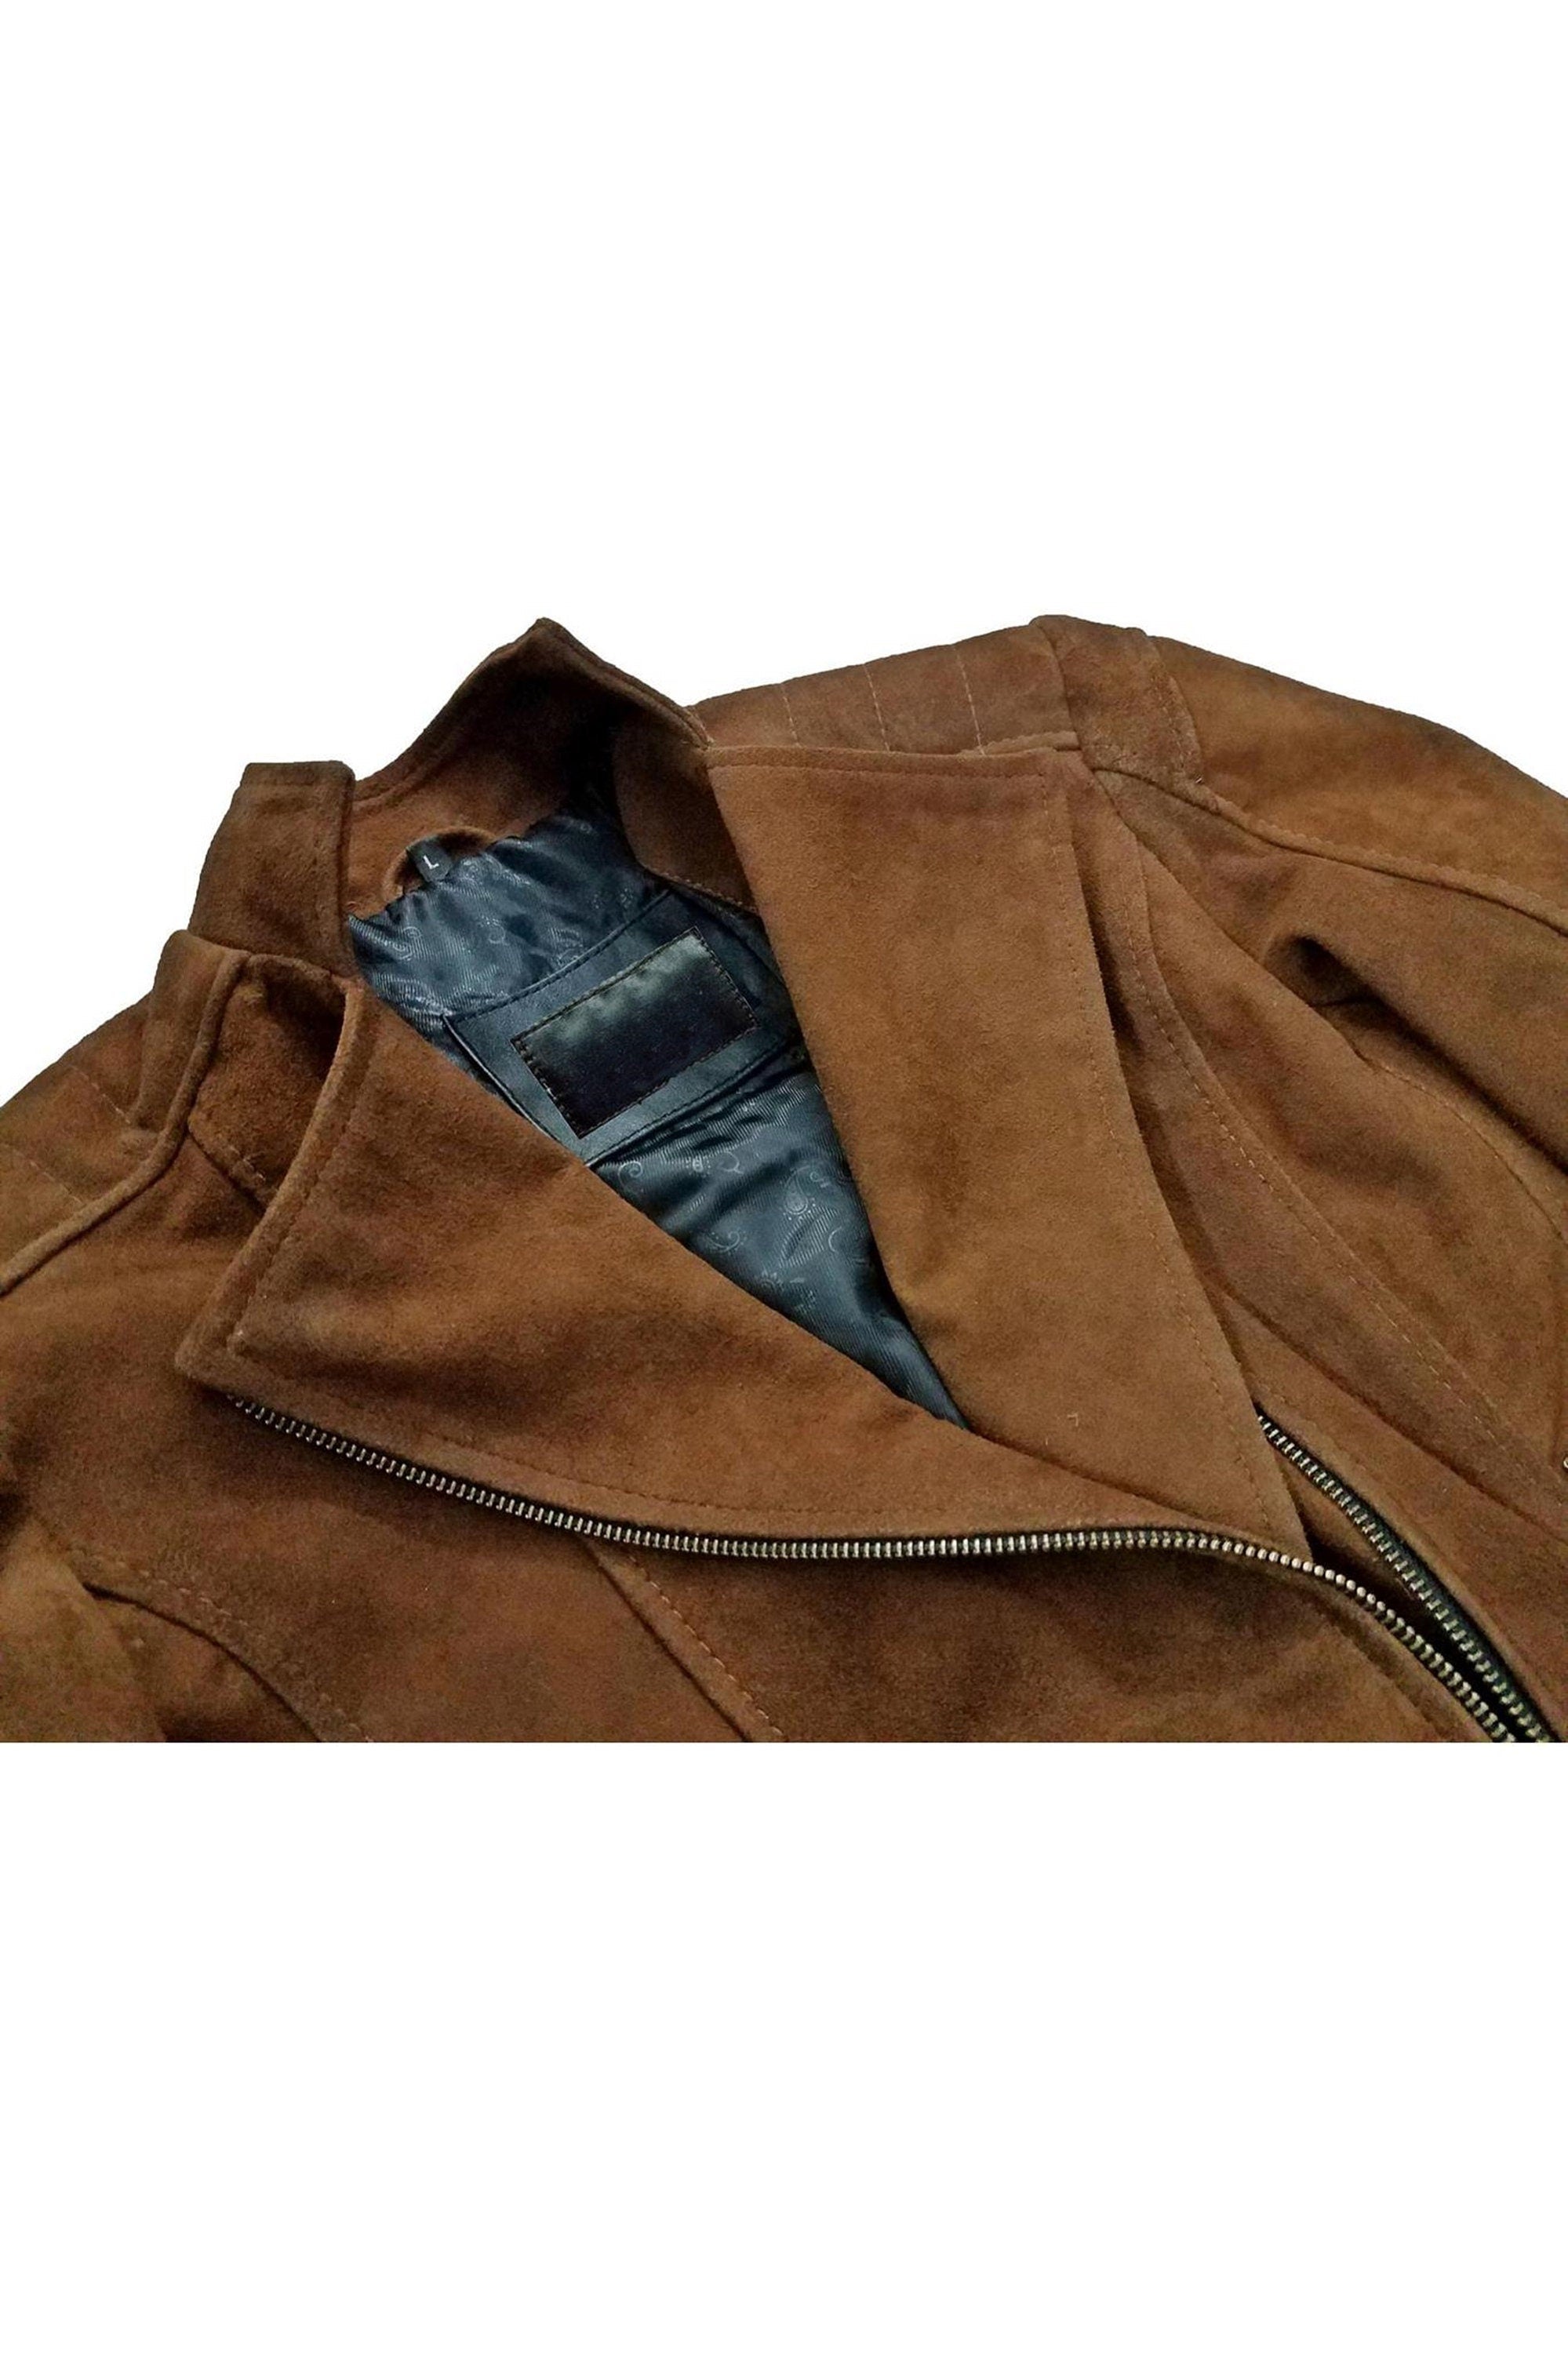 Womens Tan Suede Leather Jacket